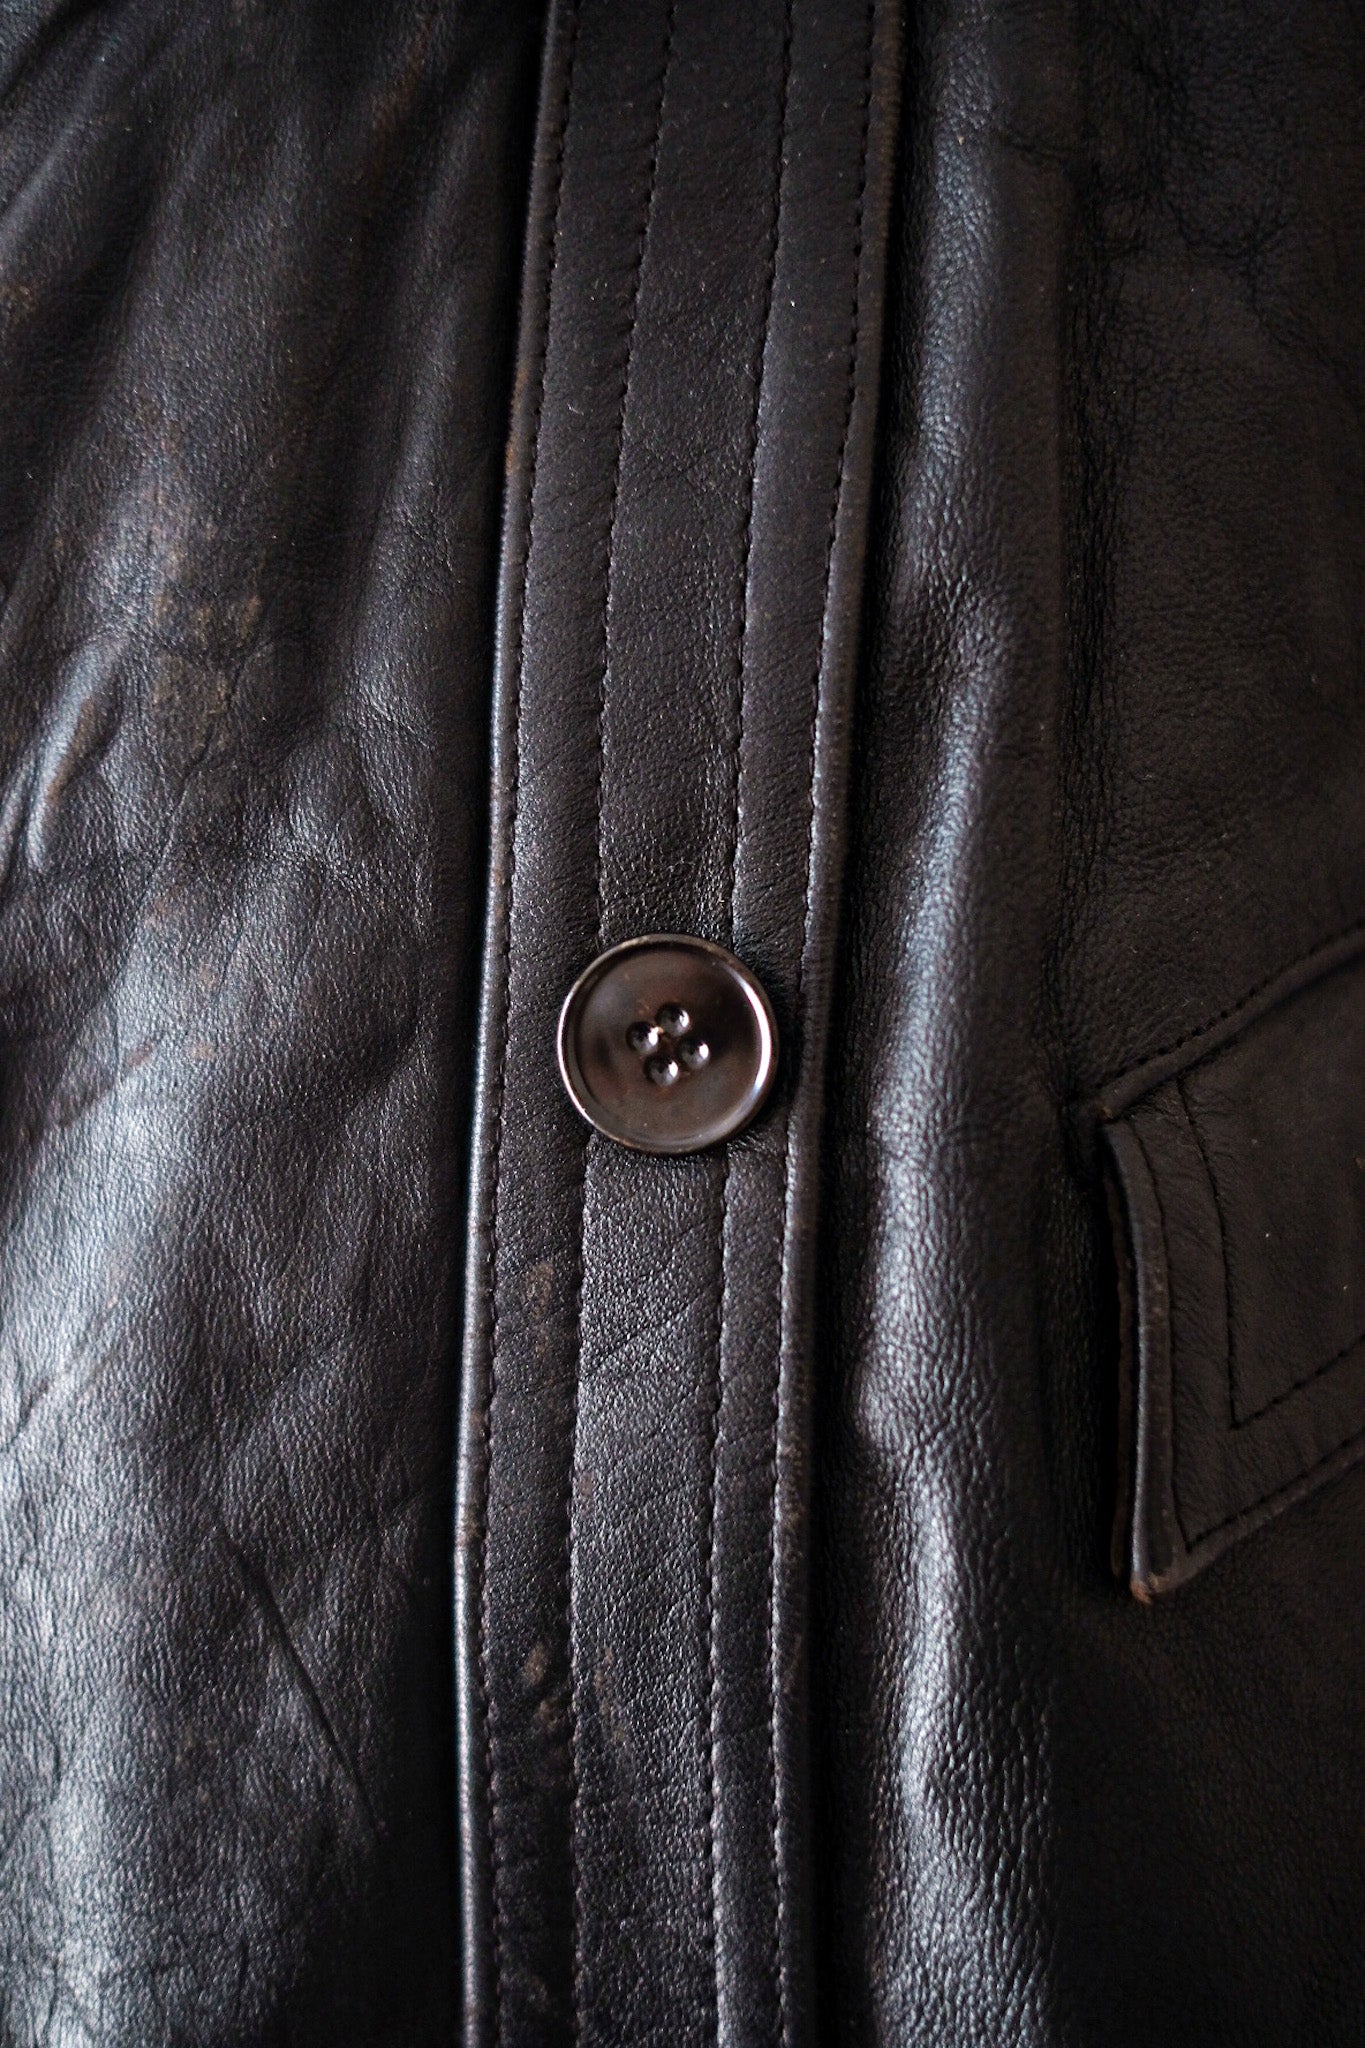 [~ 50's] French Vintage Le Corbusier Leather Work Jacket "Wool Collar"